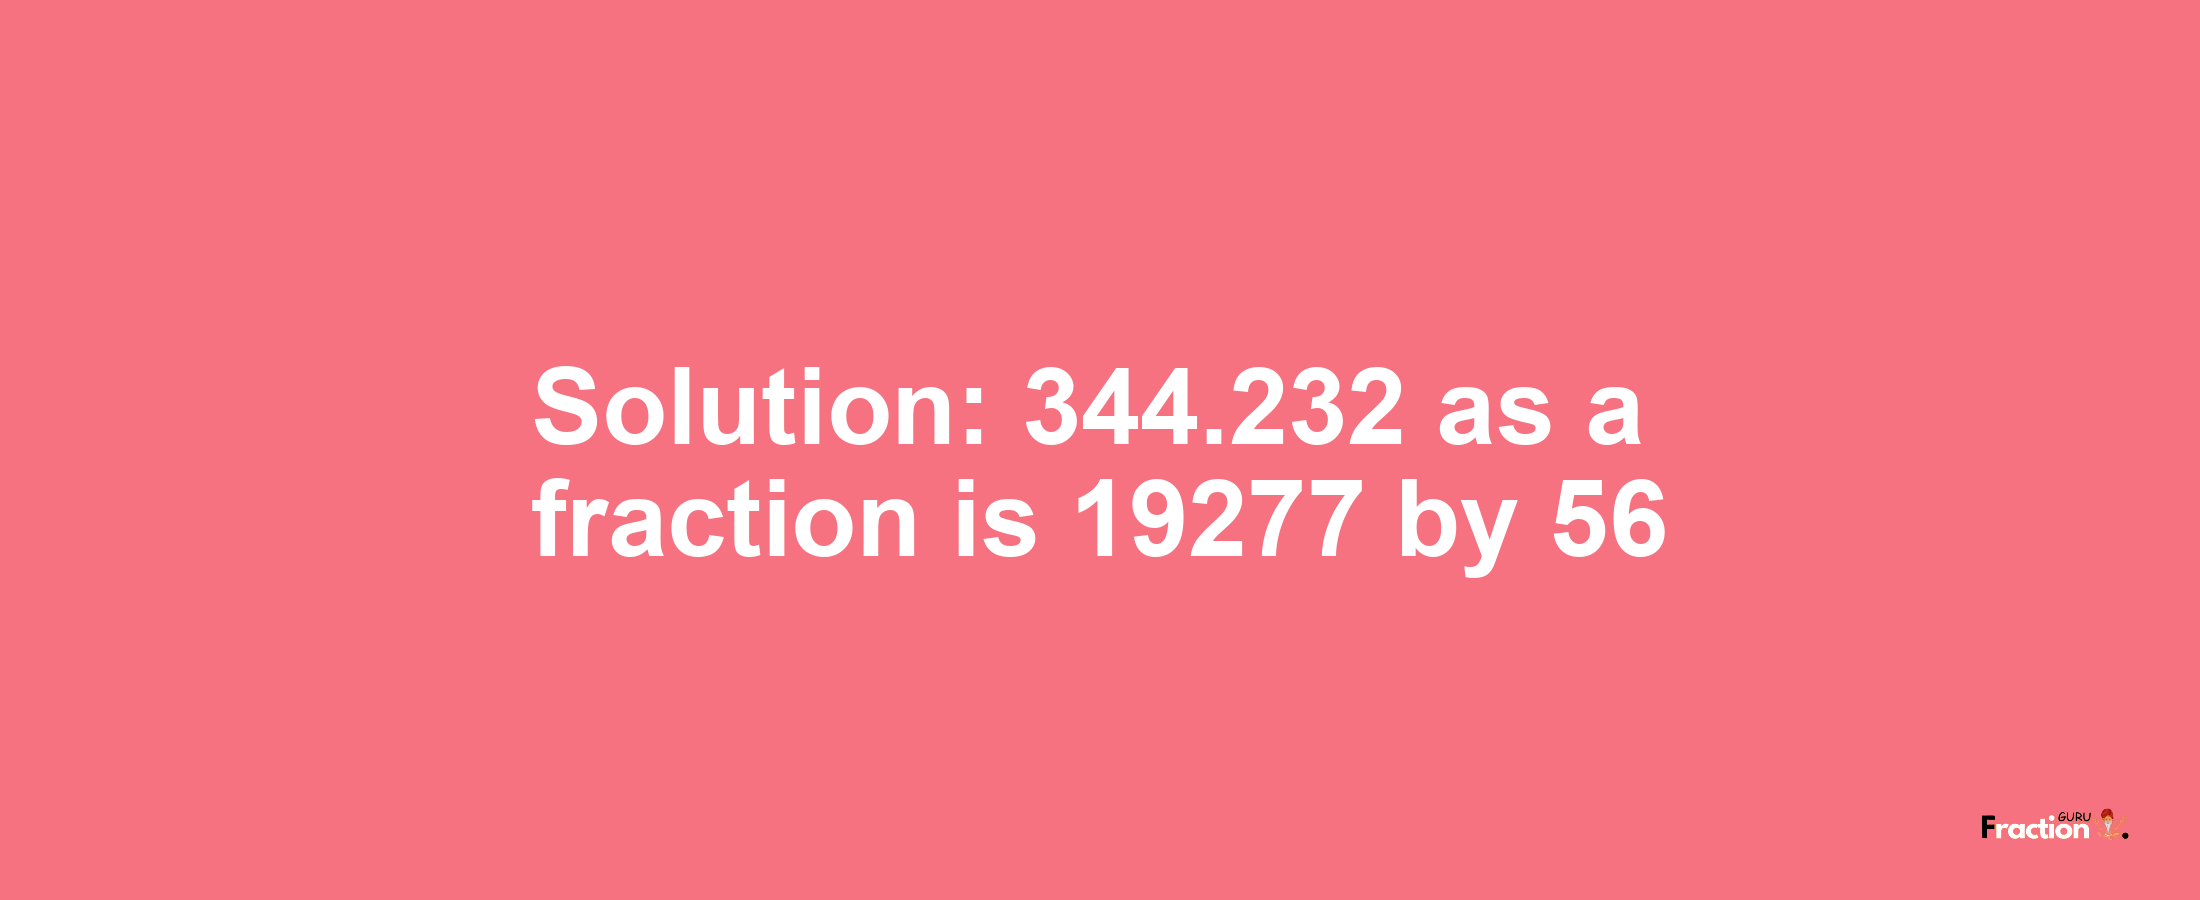 Solution:344.232 as a fraction is 19277/56